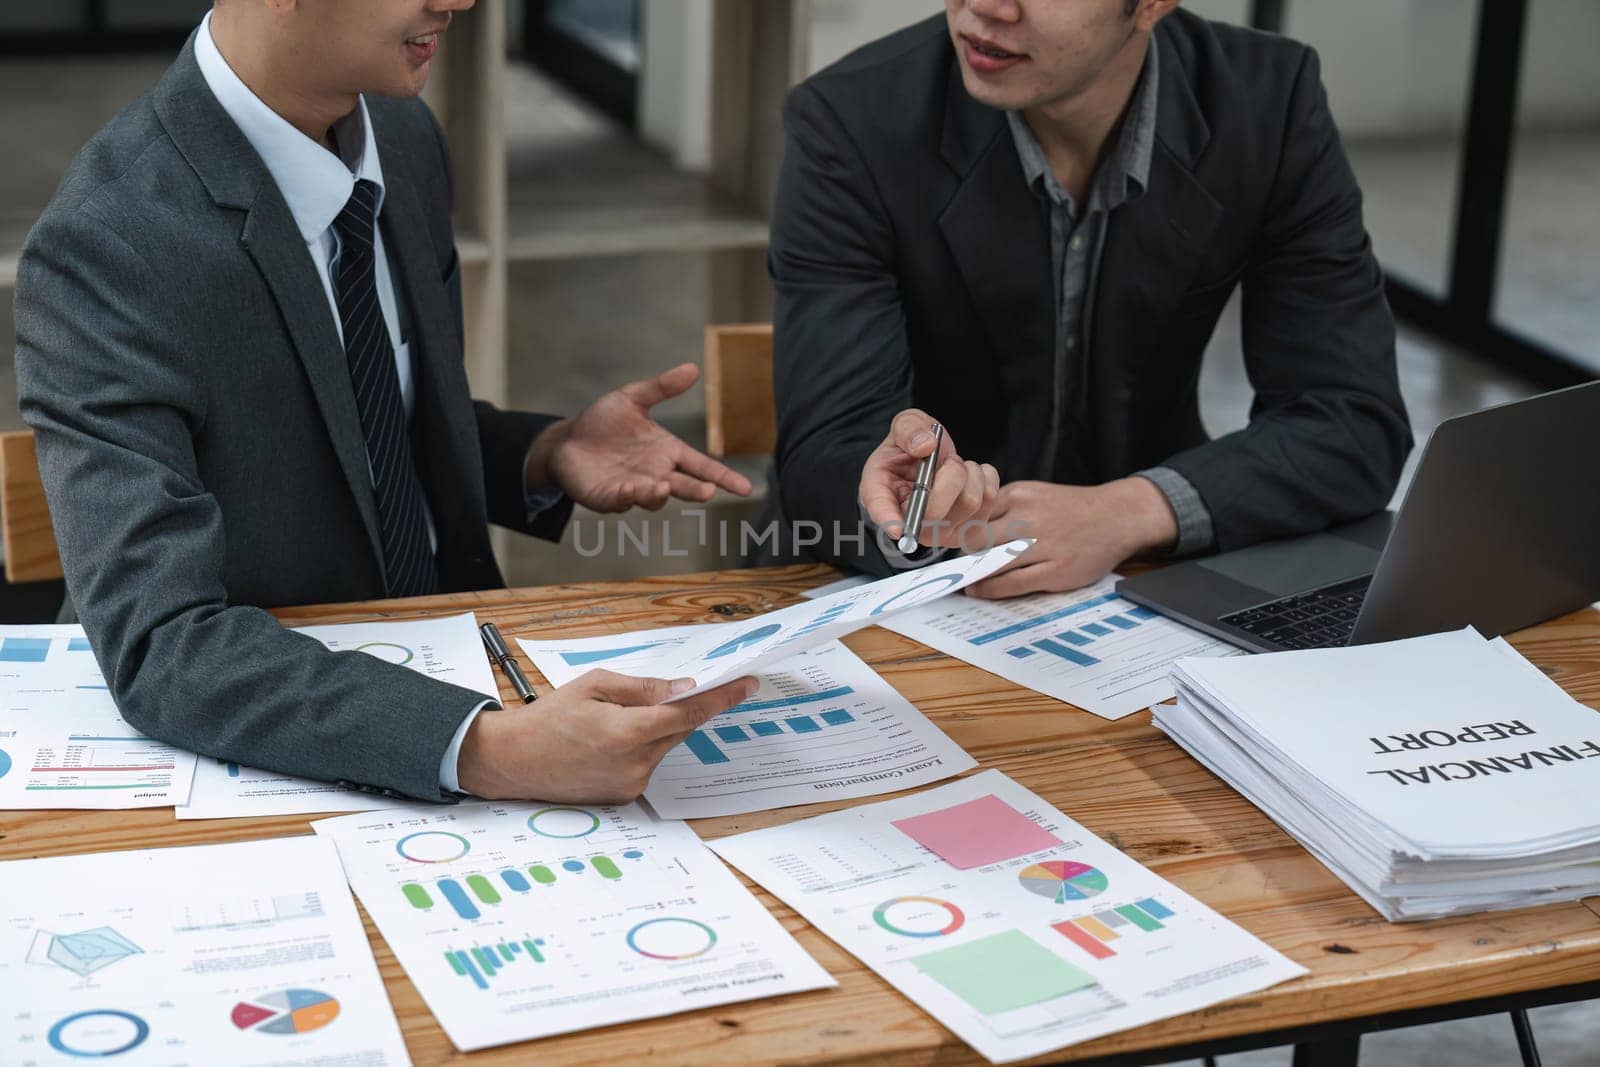 business people at meeting collaboration and teamwork of work meeting new startup project idea presentation analyze plan marketing and investment in an office.